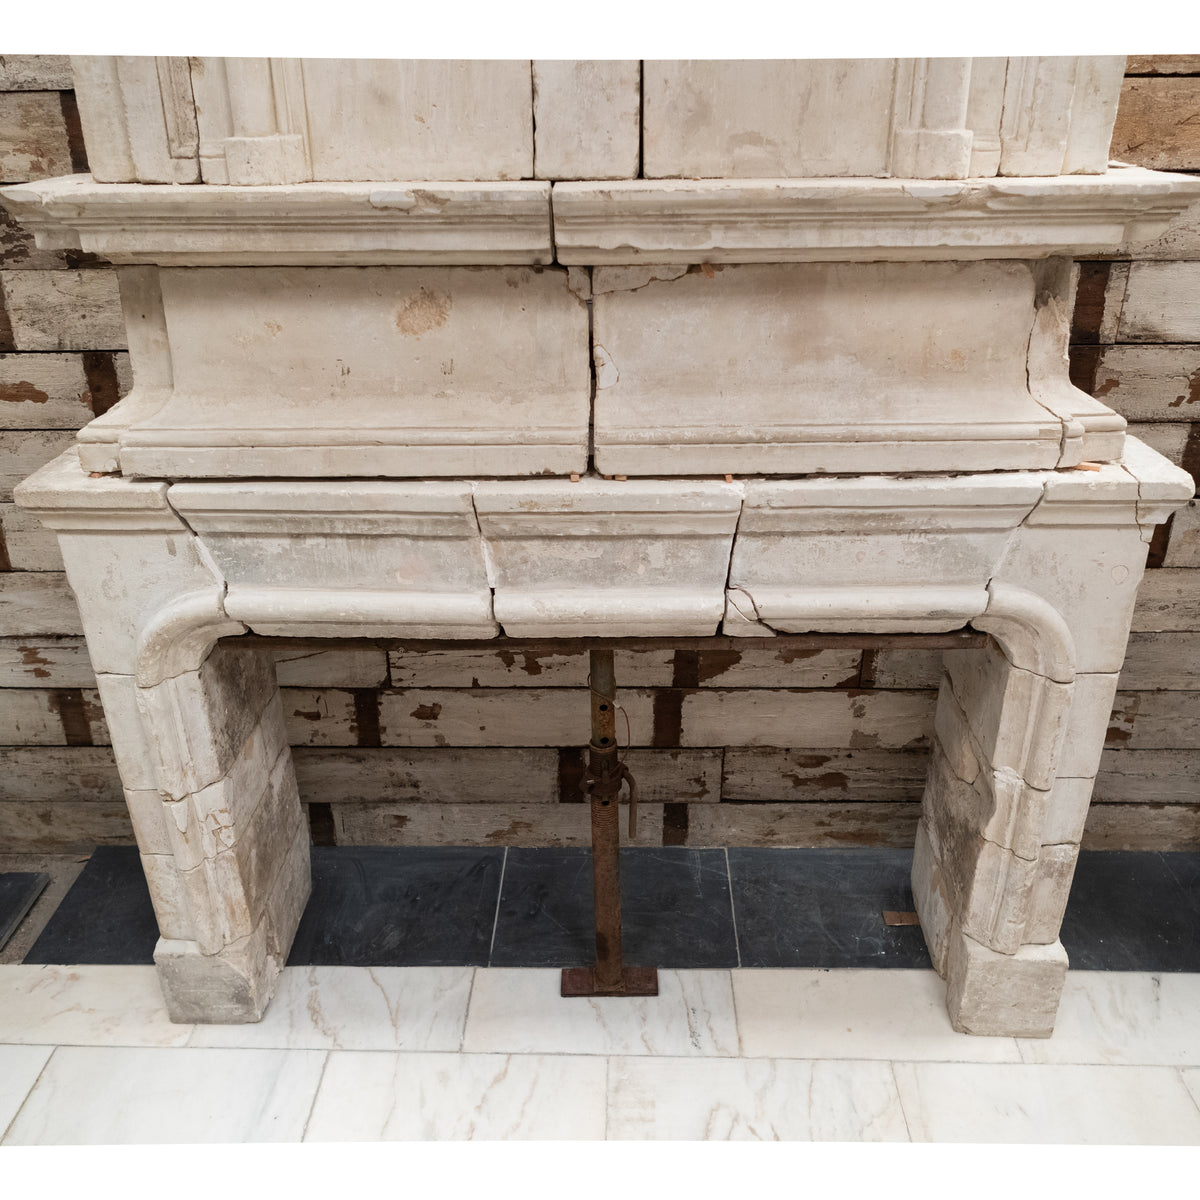 Monumental Antique 18th Century French Stone Chimneypiece | The Architectural Forum